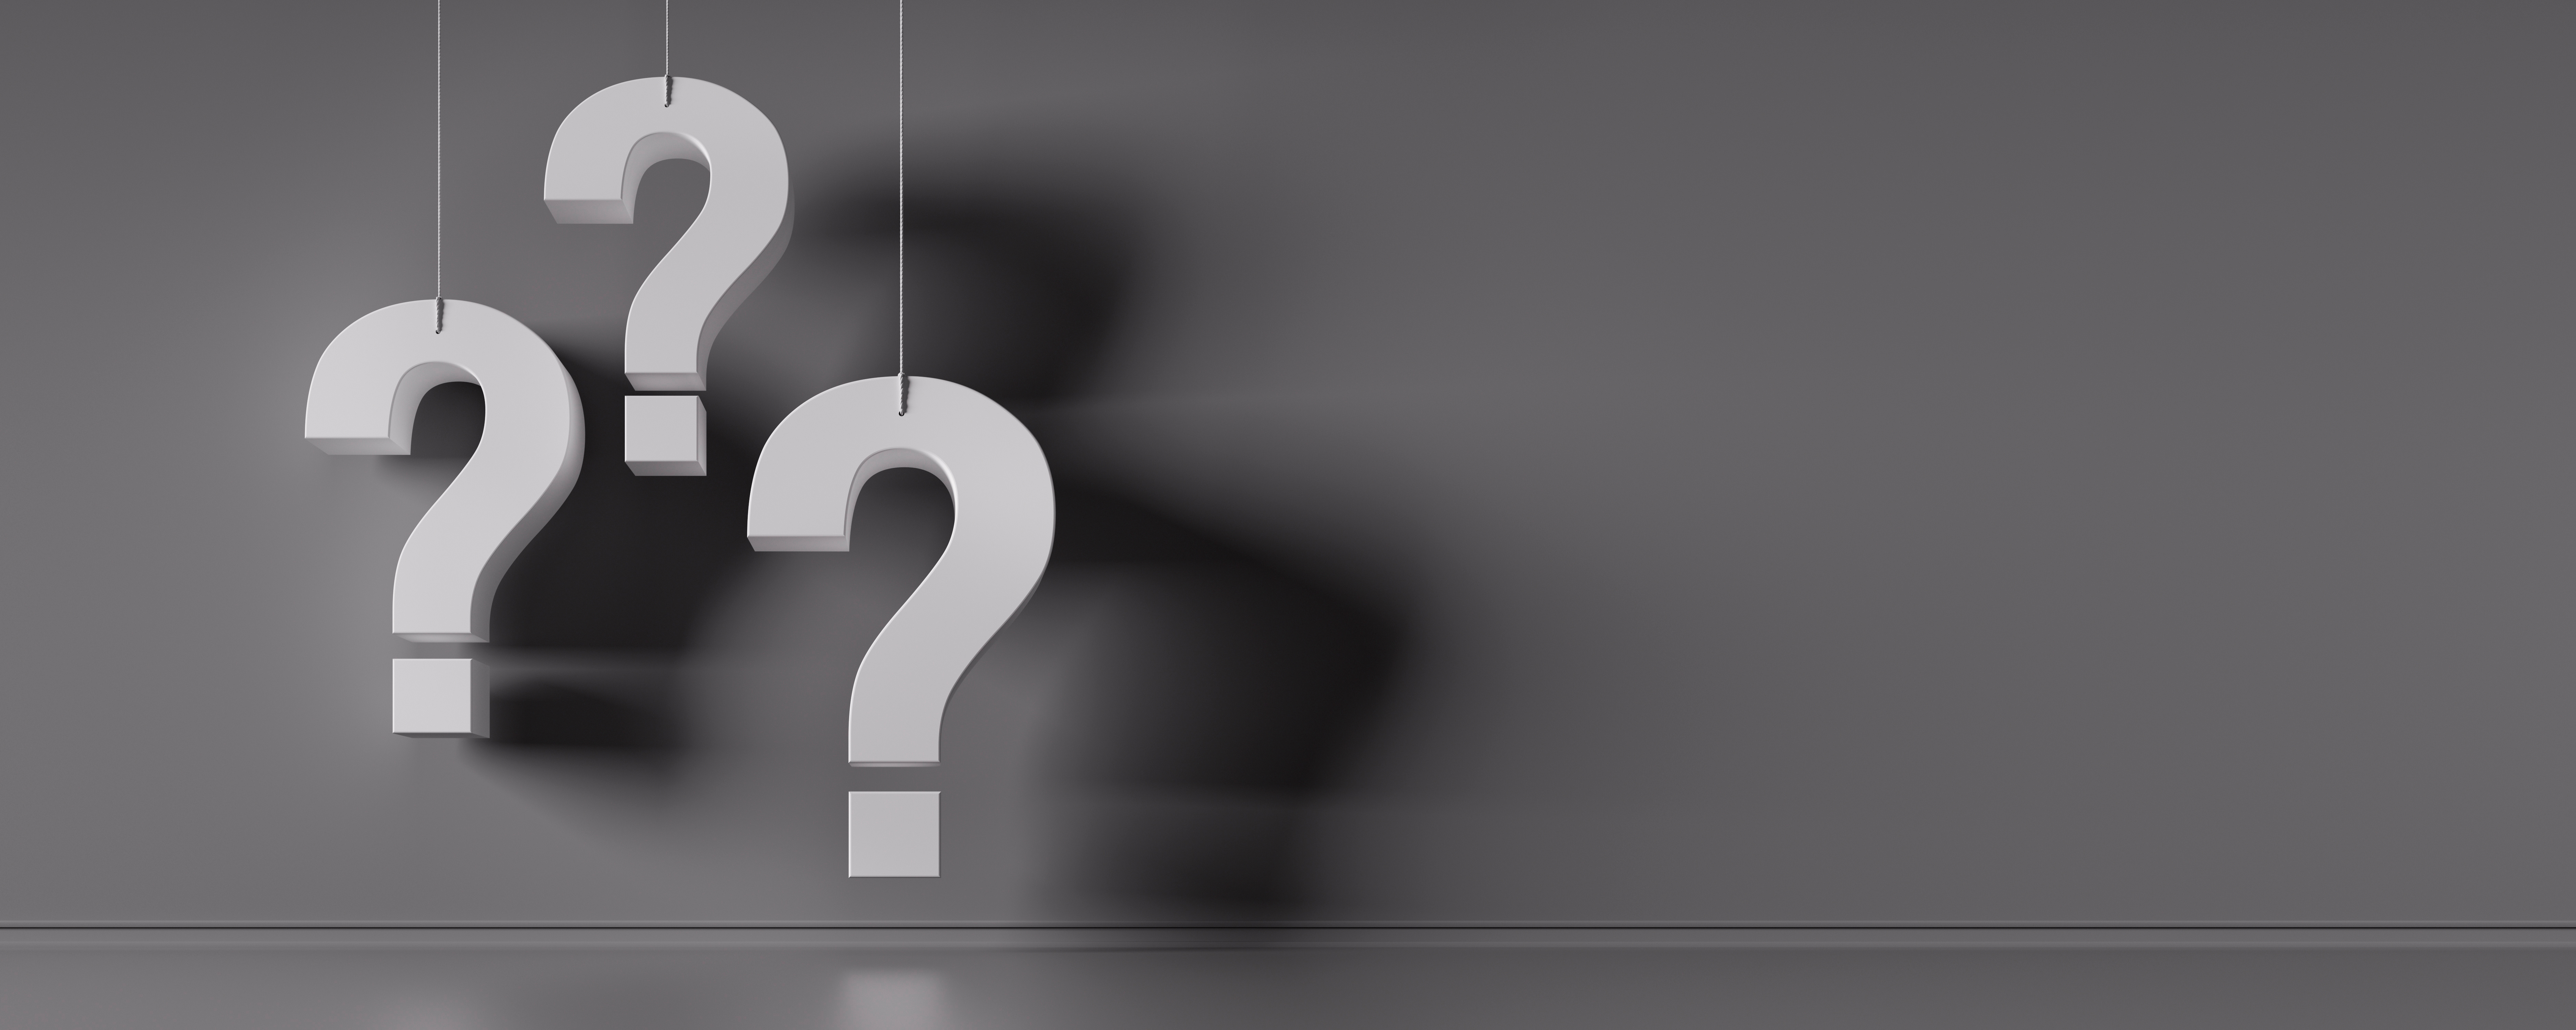 3 white question marks hanging in front of a black background for header image on conveyancer FAQ blog 